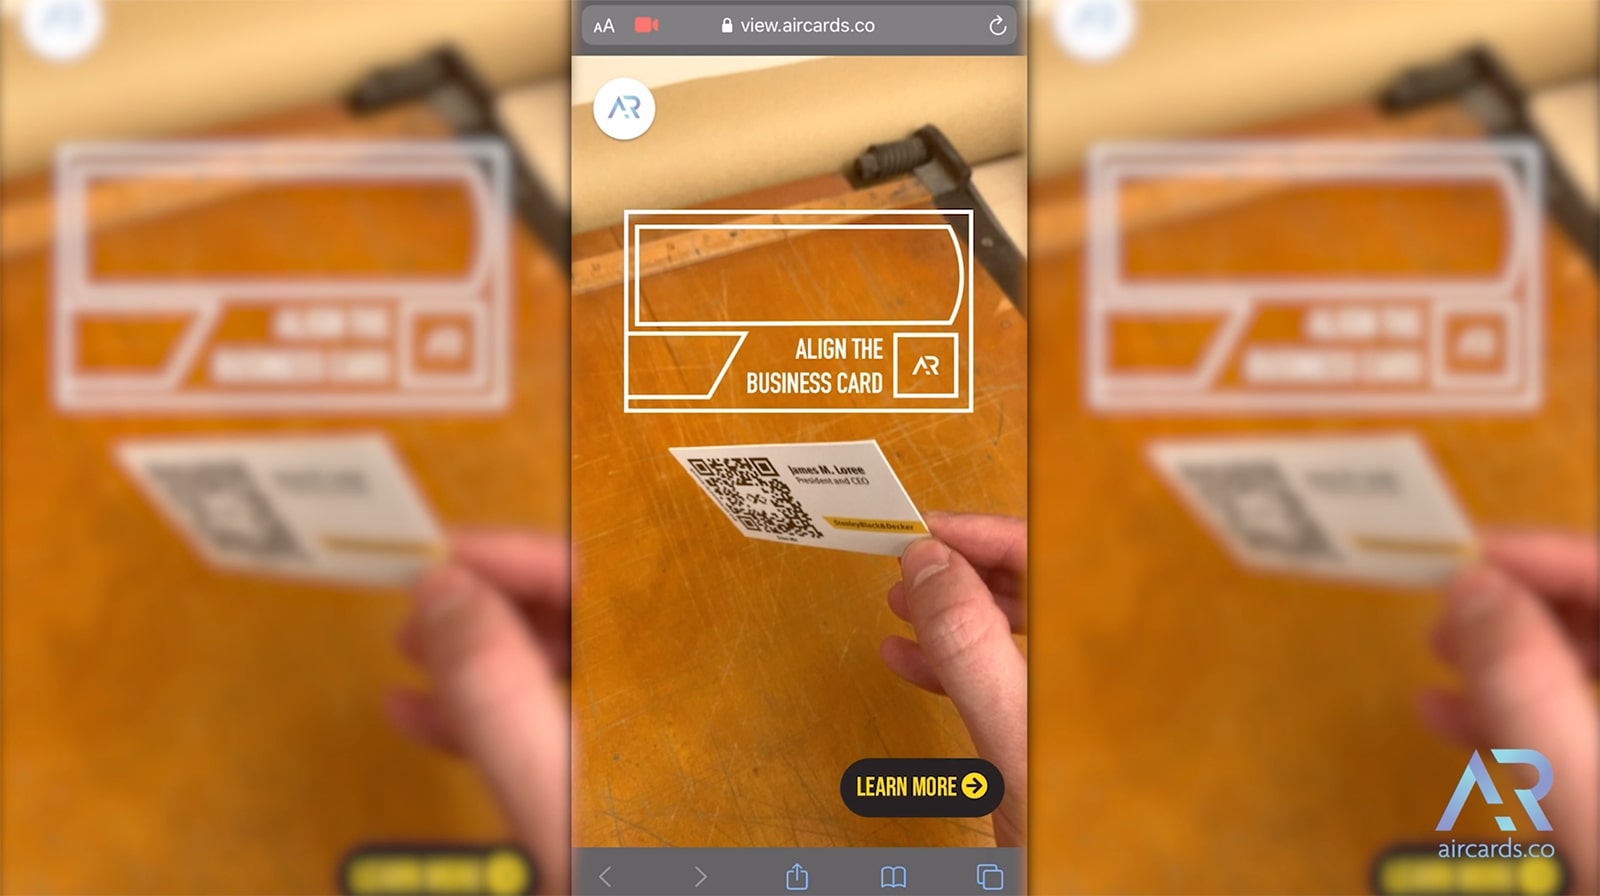 Top 6 Web AR examples in 2021